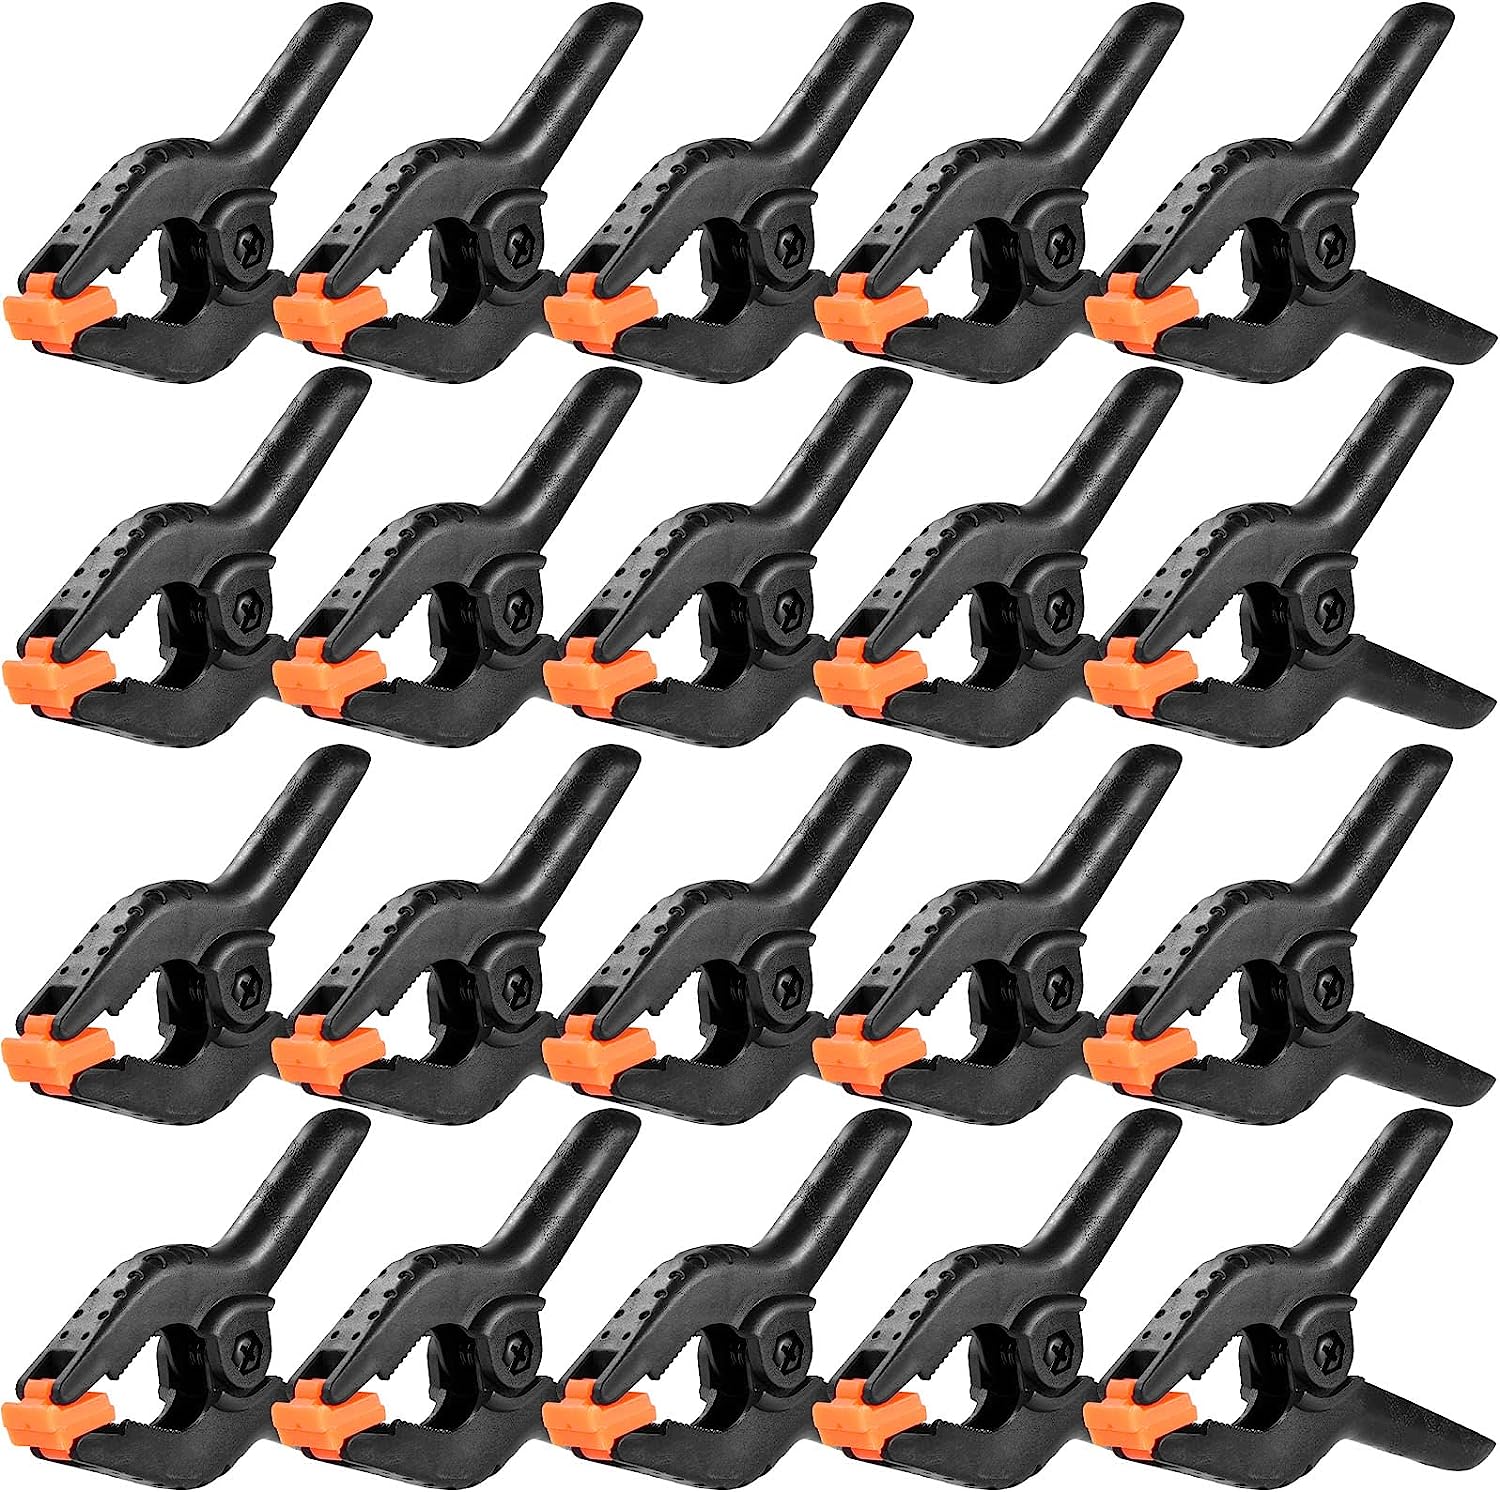 Mr. Pen - Spring Clamps, 6 Pack, 4.5 Inch, Plastic Clamps